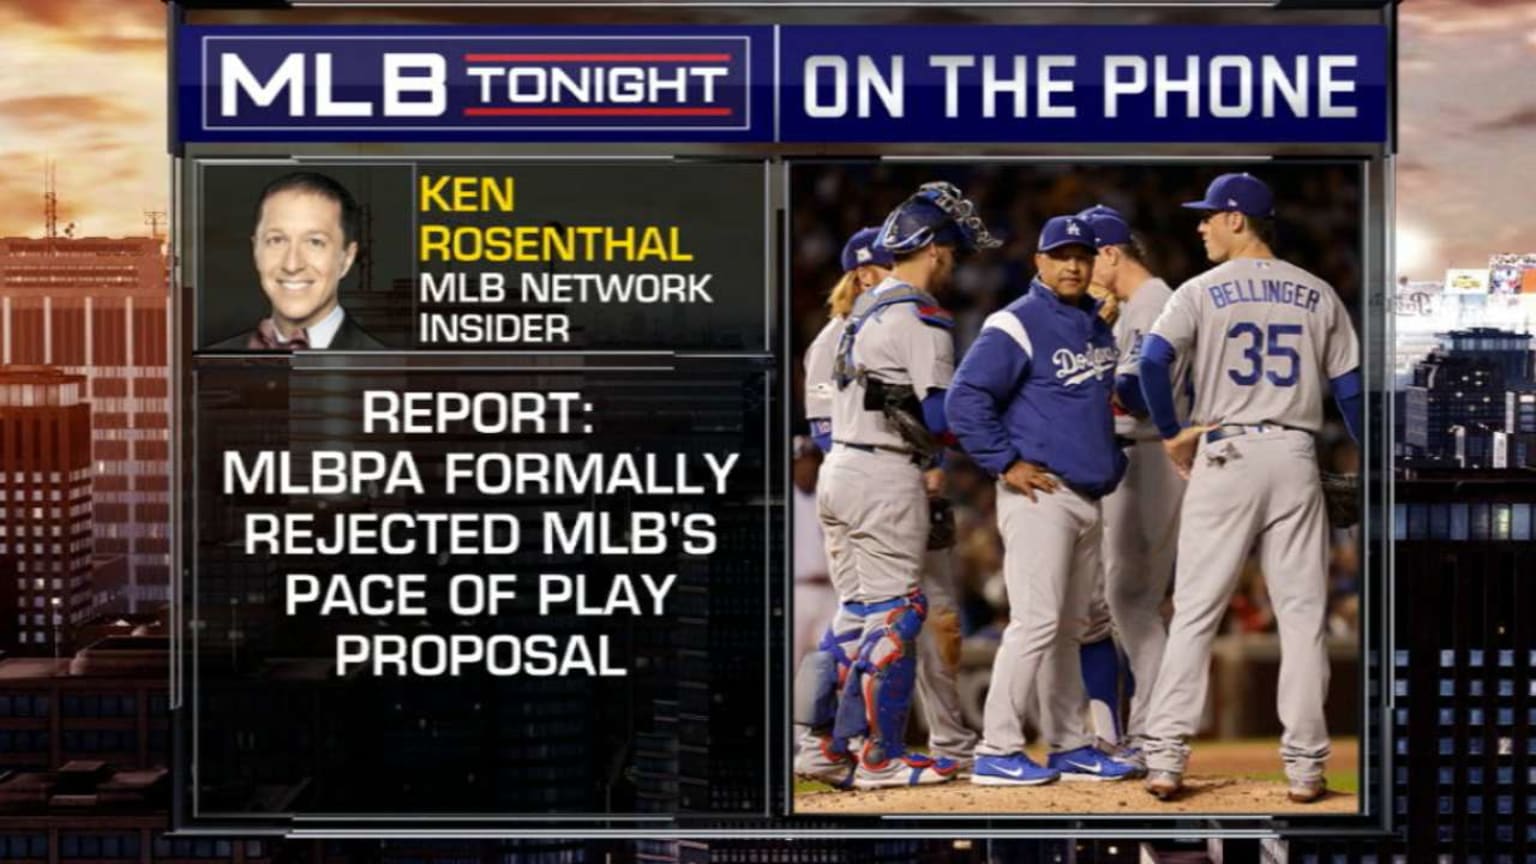 MLB Network Stabs Me in the Heart - Off The Bench